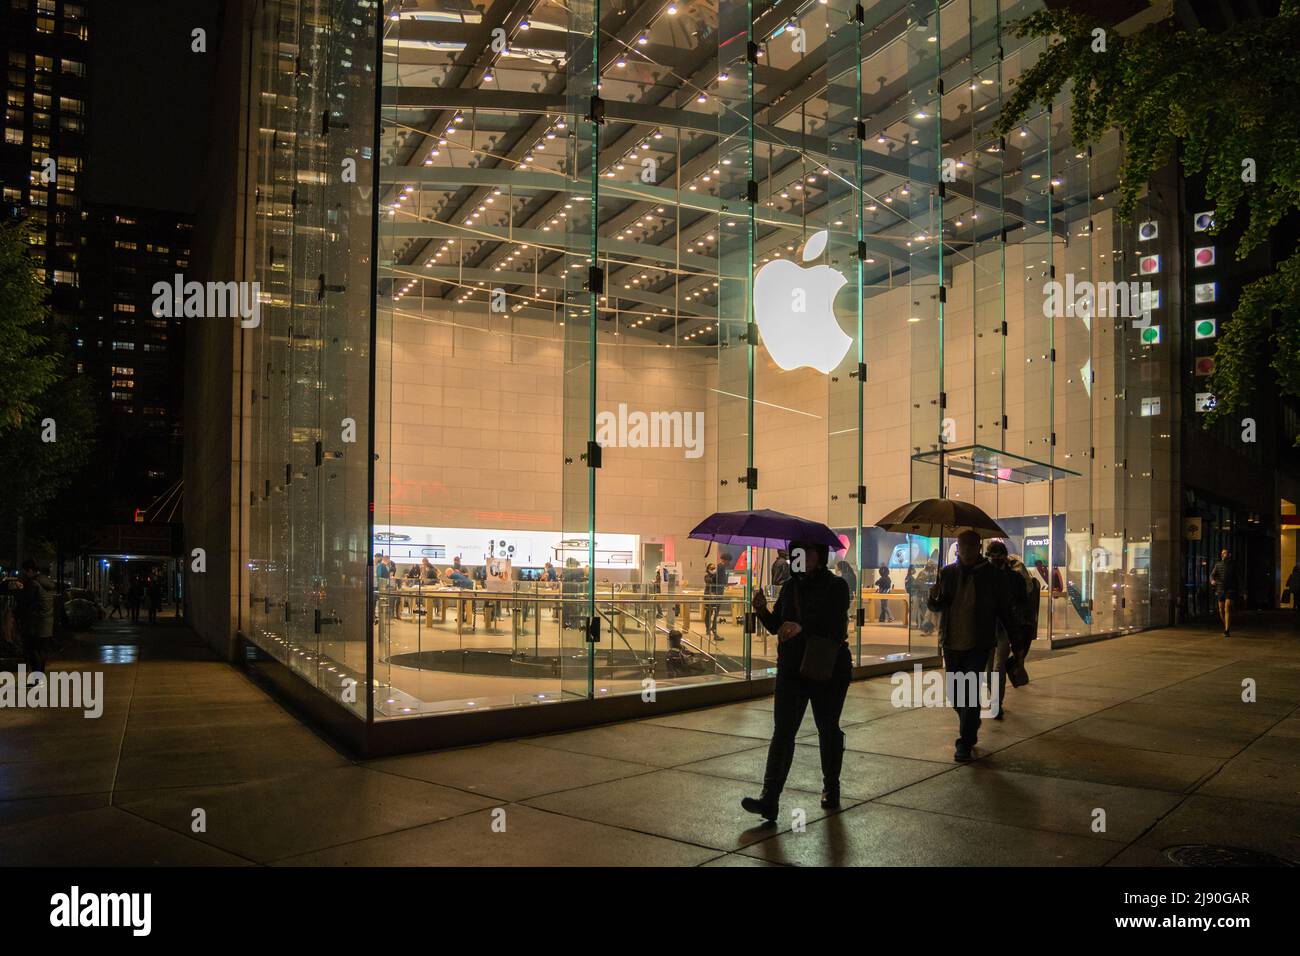 New York, NY, US-October 26, 2021: People with umbrellas walk by Apple computer store on a rainy night. Stock Photo